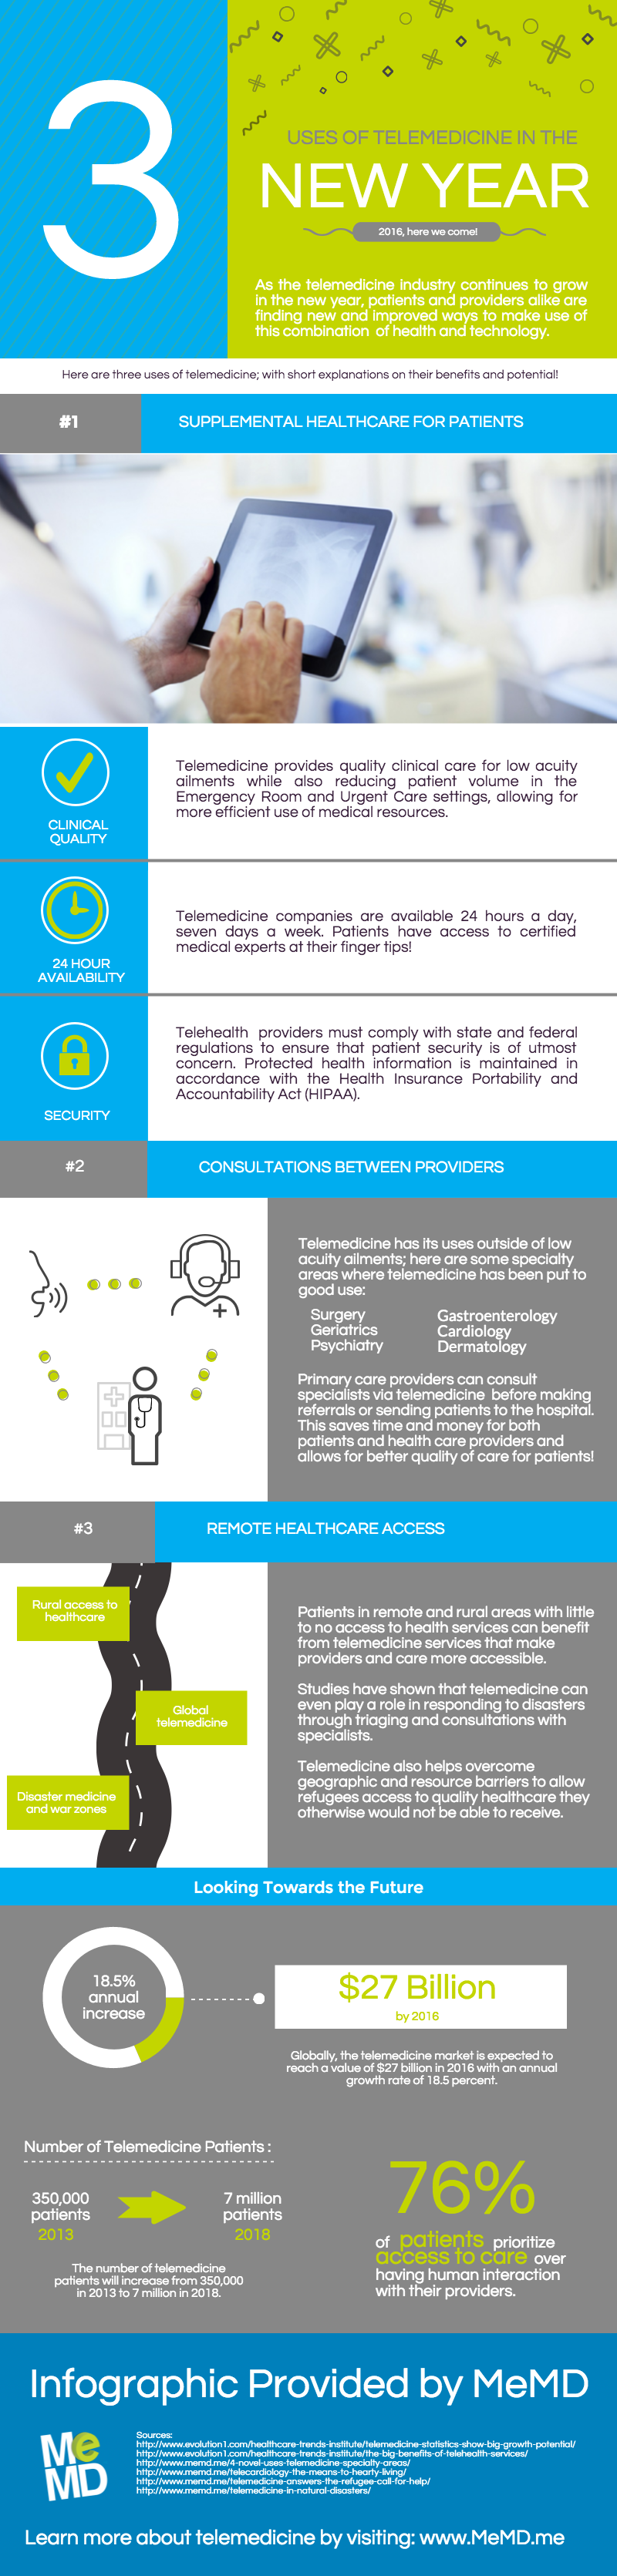 Blog-infographic-Telemedicine-in-the-New-Year